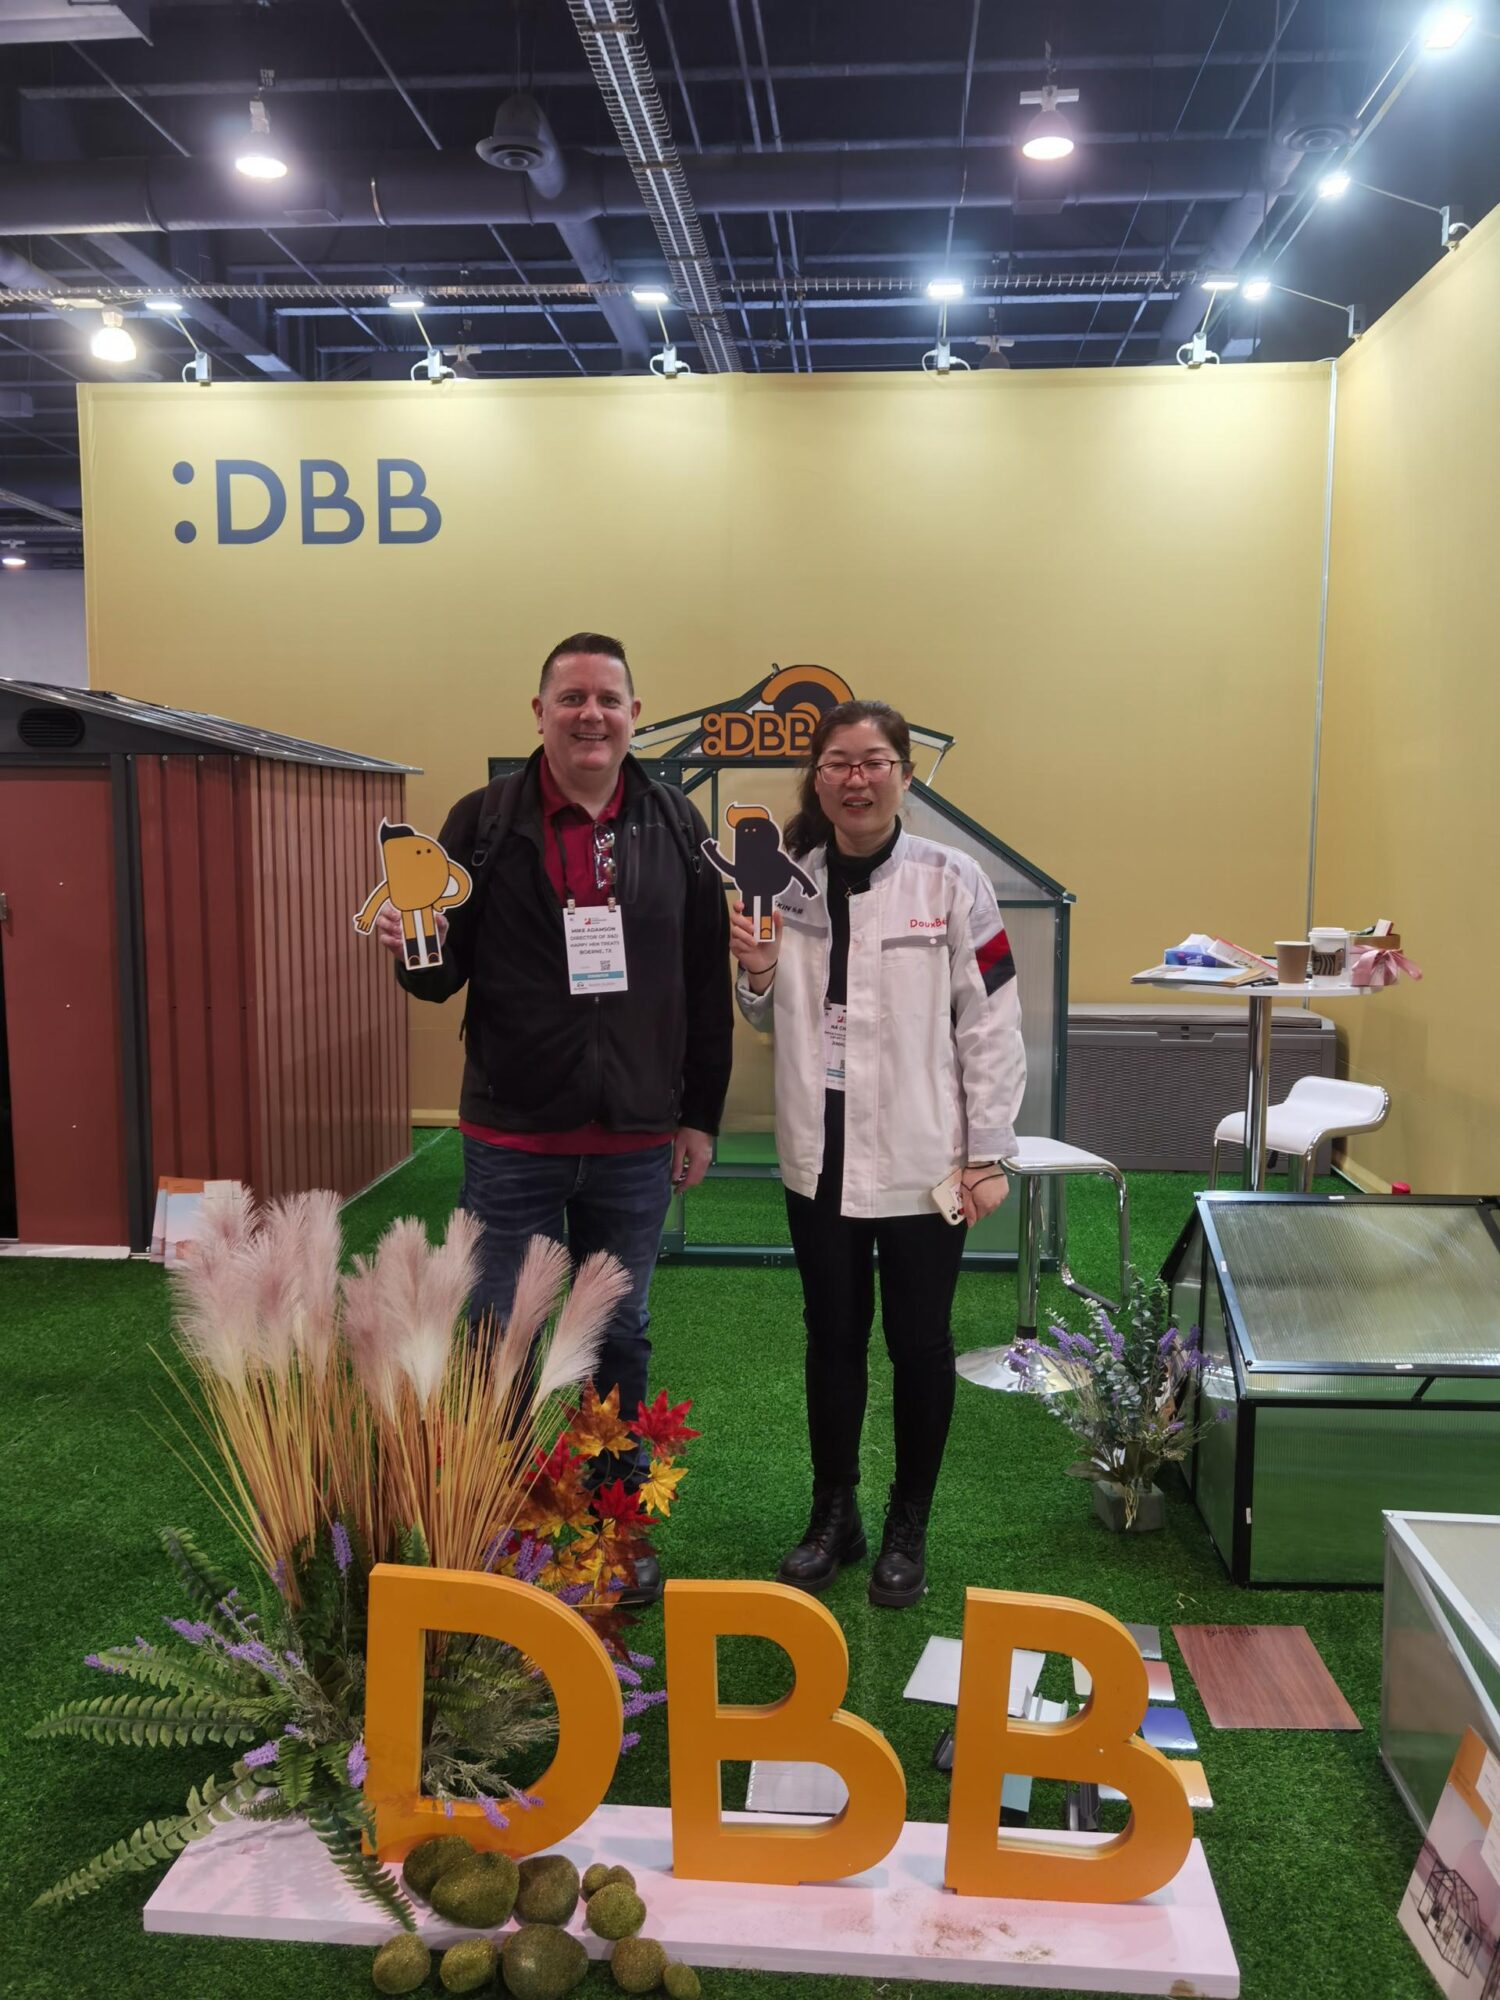 The National Hardware Show in Las Vegas officially opened DiBiBi